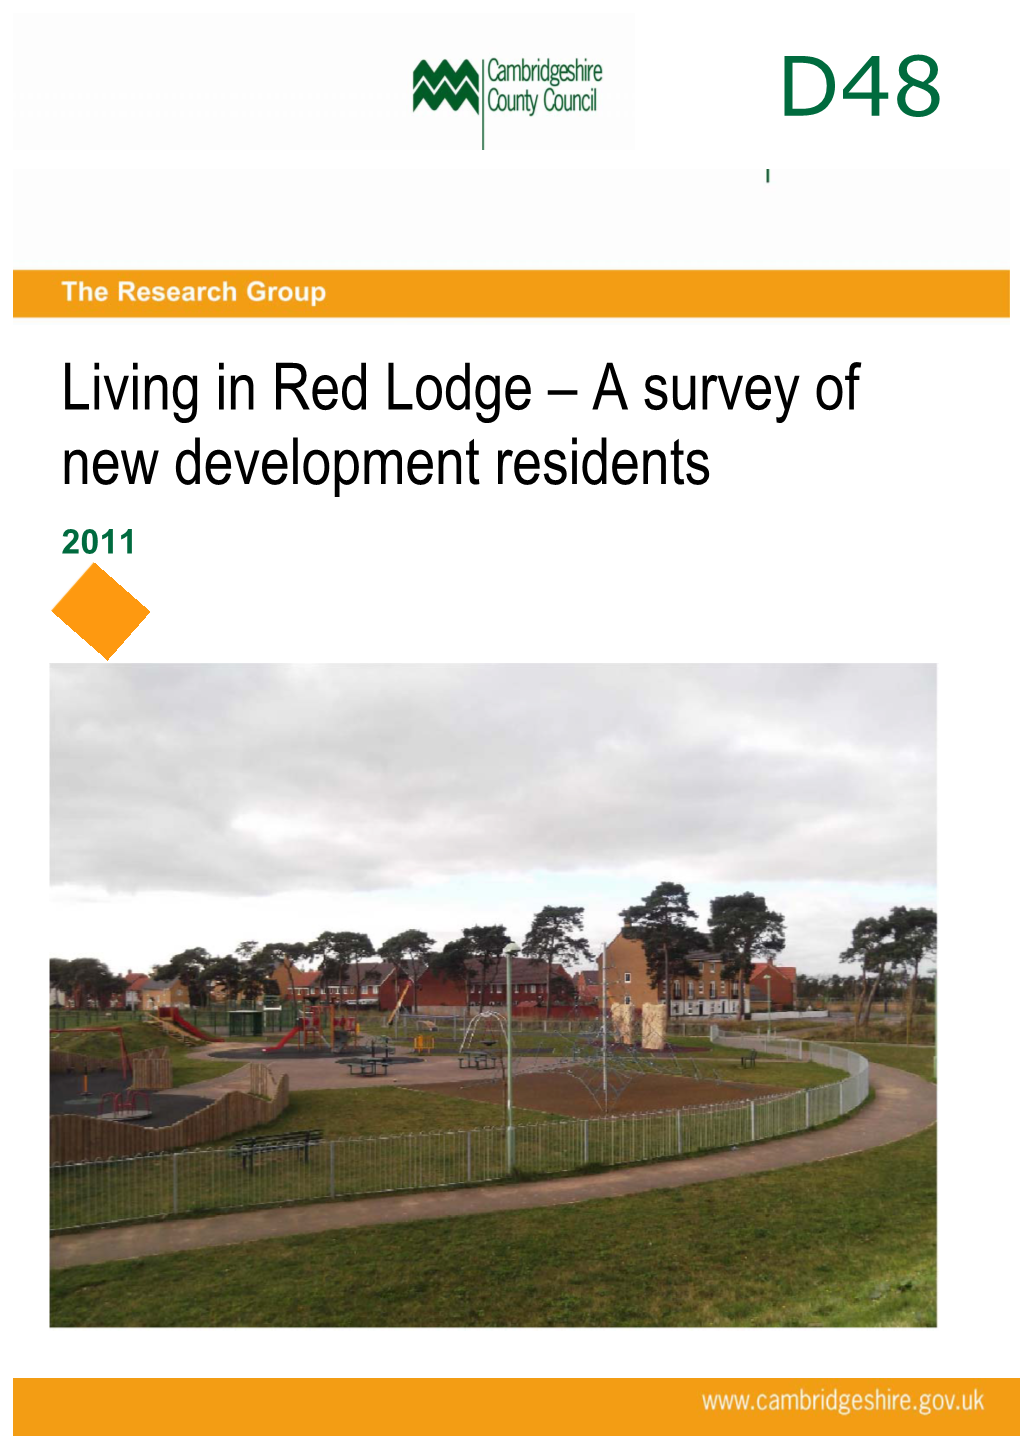 Living in Red Lodge – a Survey of New Development Residents 2011 Table of Contents Table of Contents